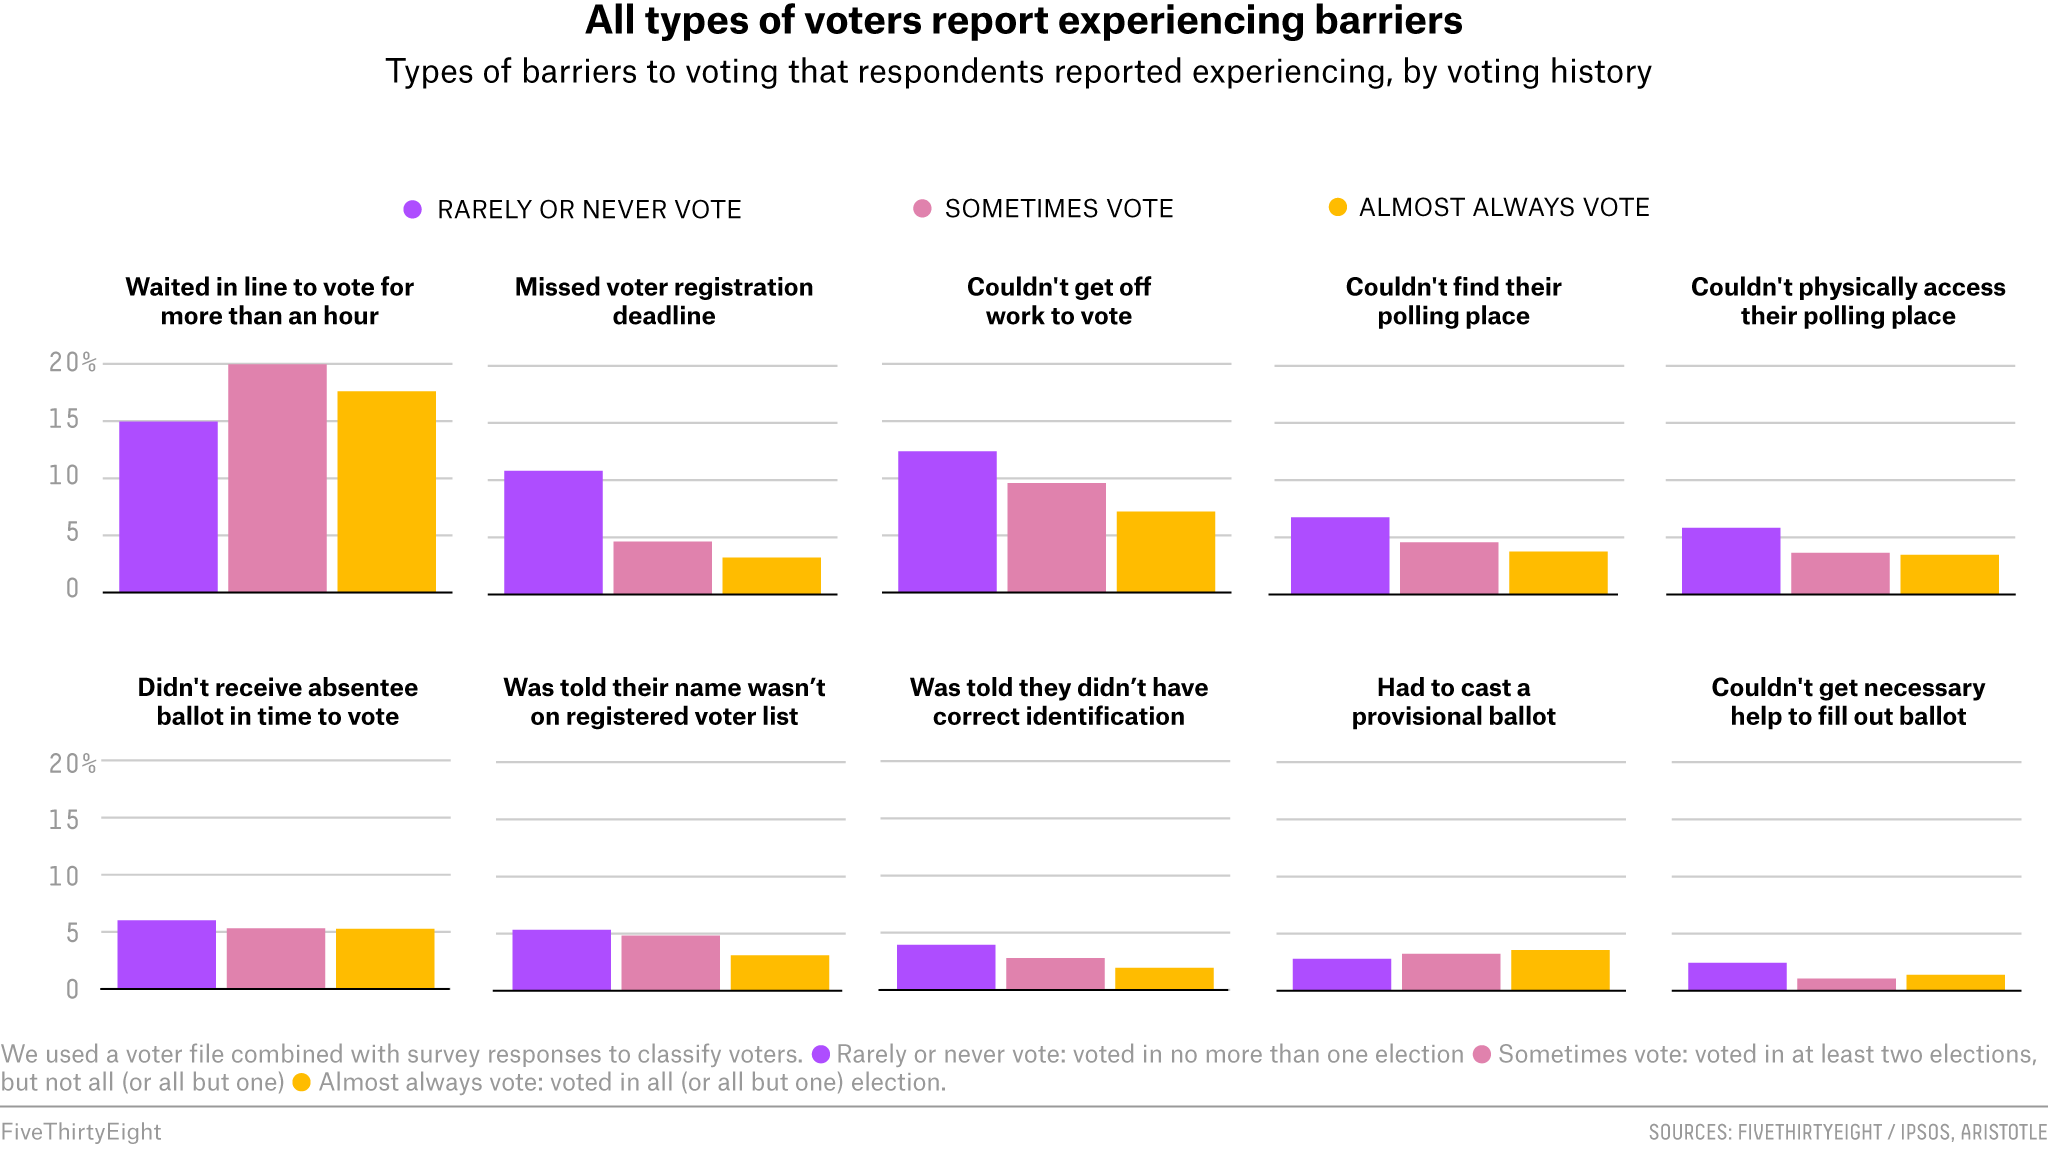 All types of voters report experiencing barriers